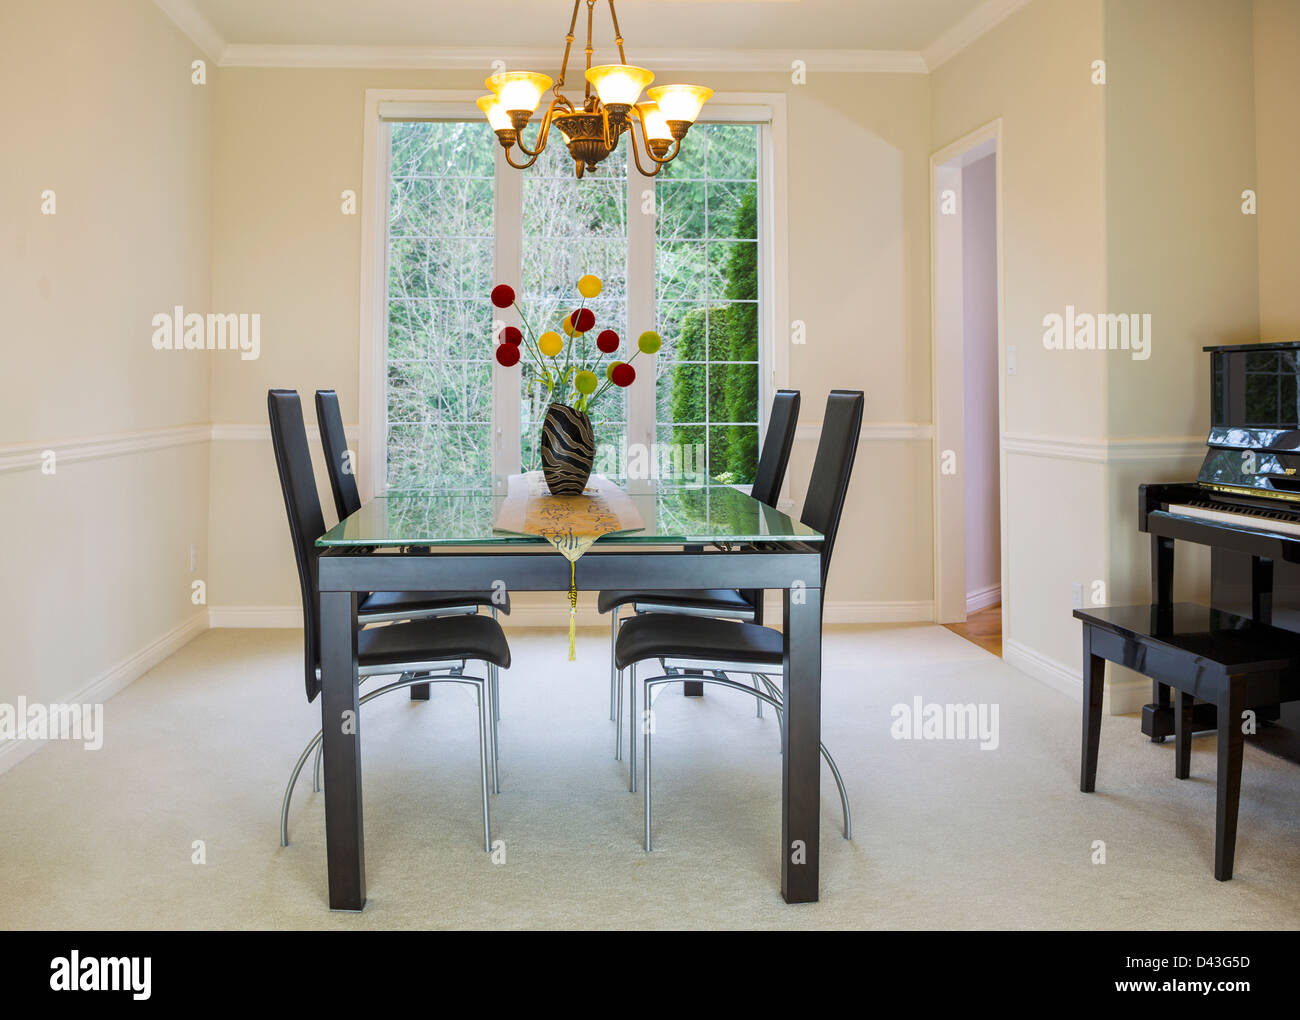 Horizontal photo of family formal dining room with daylight coming through large windows in background Stock Photo